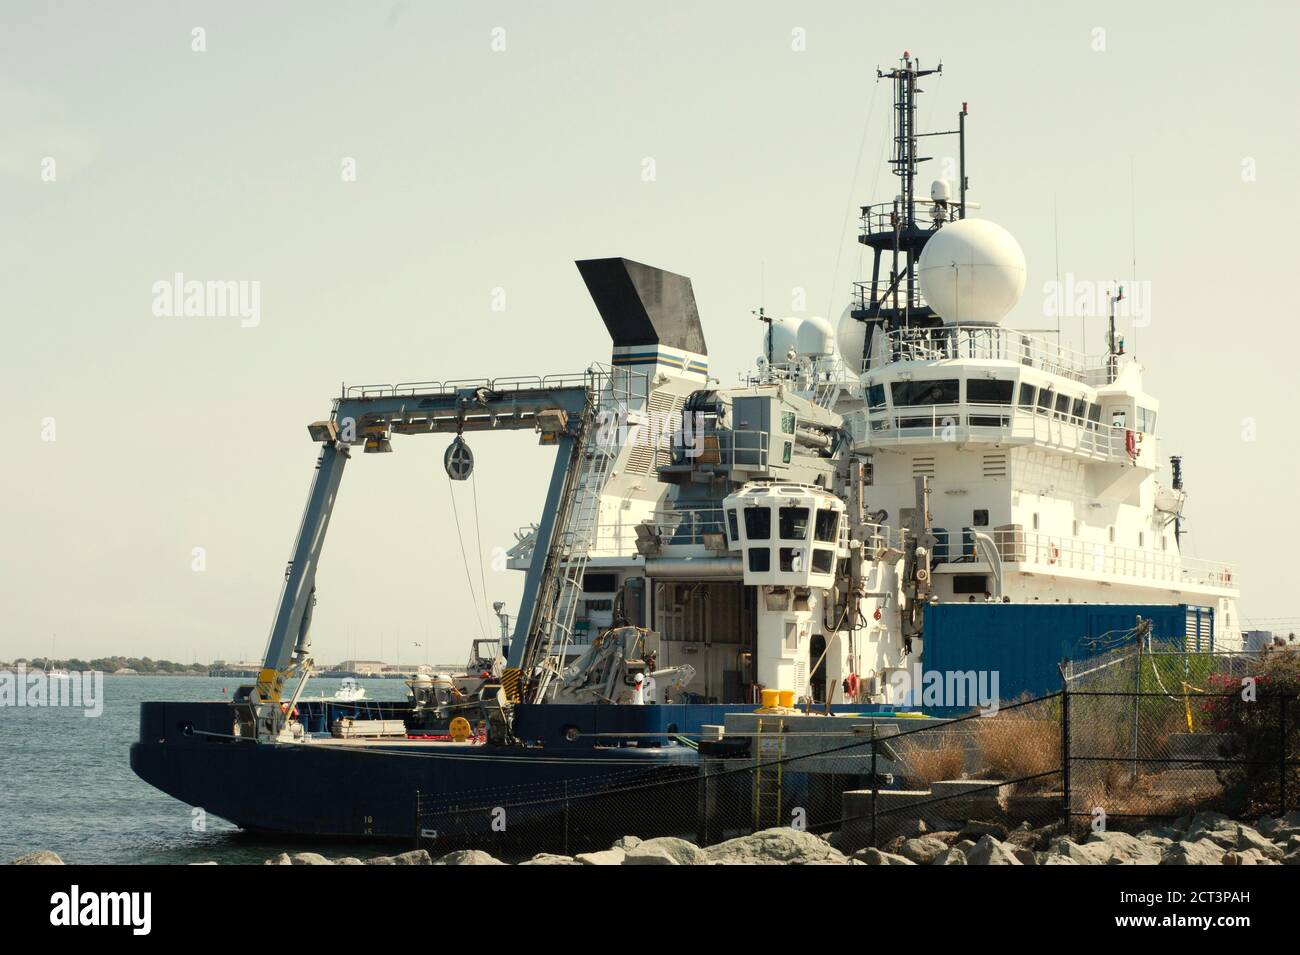 The Sally Ride research vessel was built in 2016 and is viewed in its home port, Point Loma, San Diego Bay, California. It uses hydrogen energy cells. Stock Photo